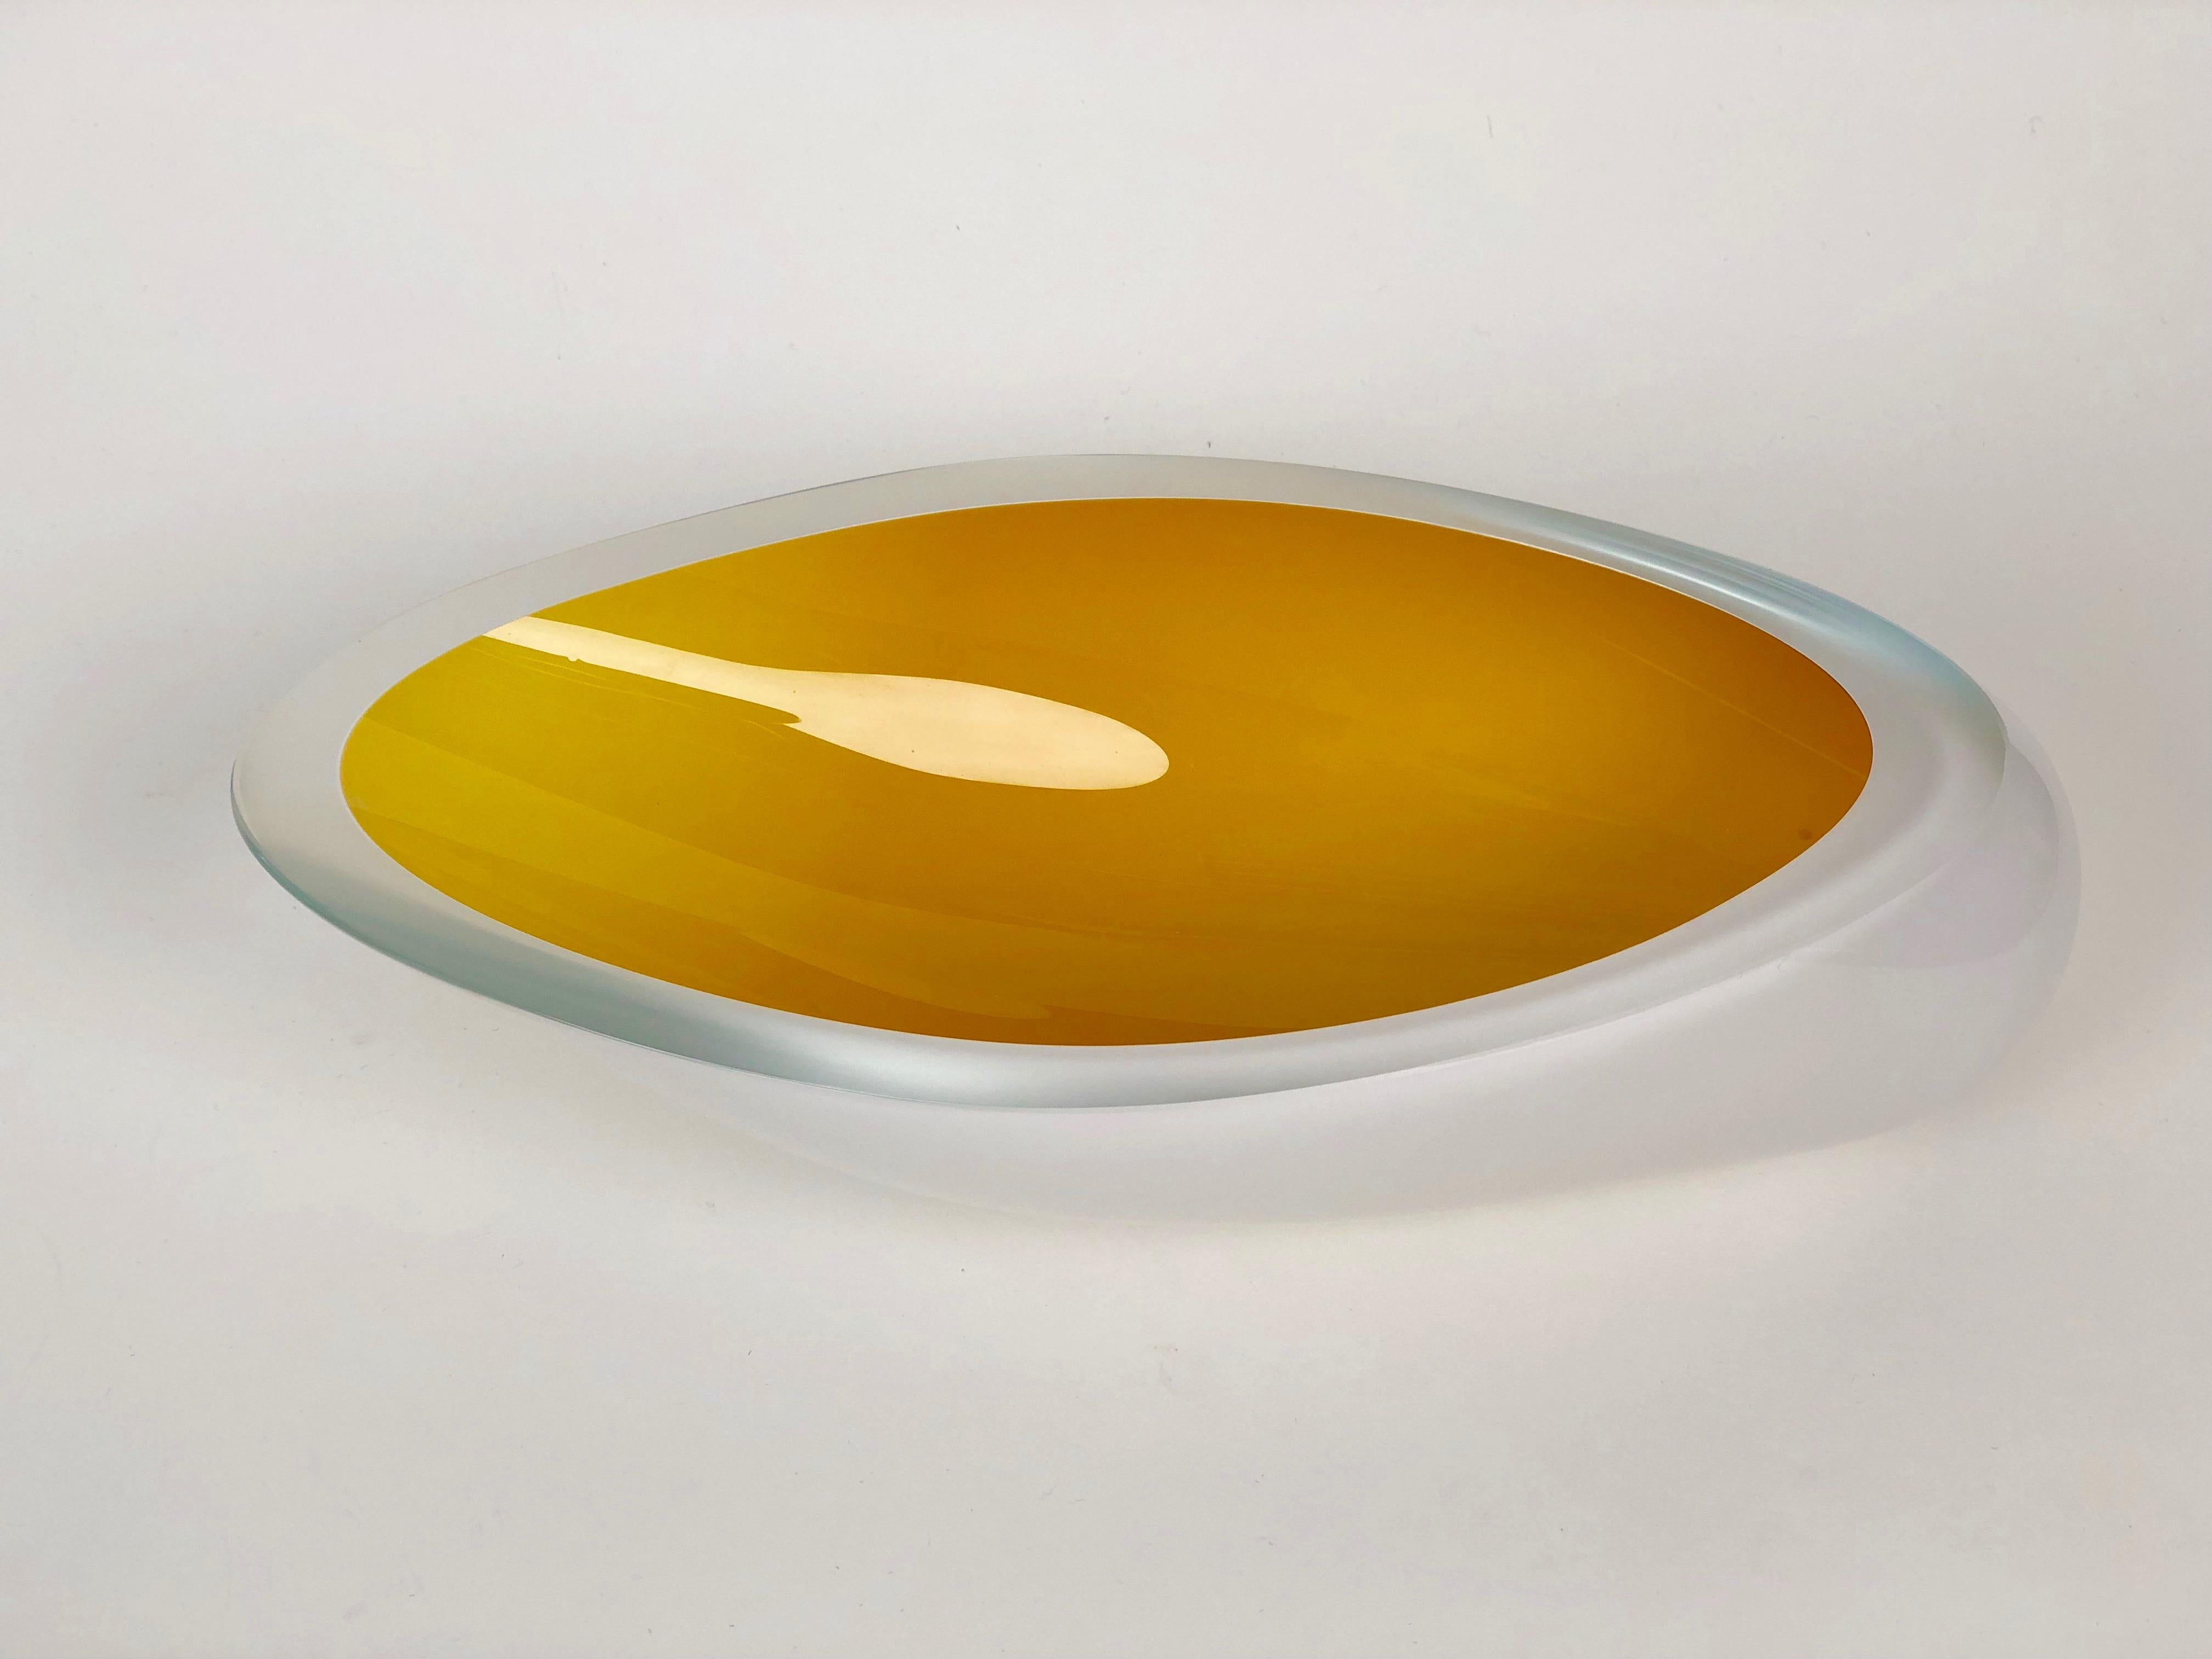 Contemporary studio glass bowl handmade in the Czech Republic. The color is made up of two layers applied to the inside, first white and
then yellow. The body is clear glass and the opening has been ground flat on the wheel. The combination of